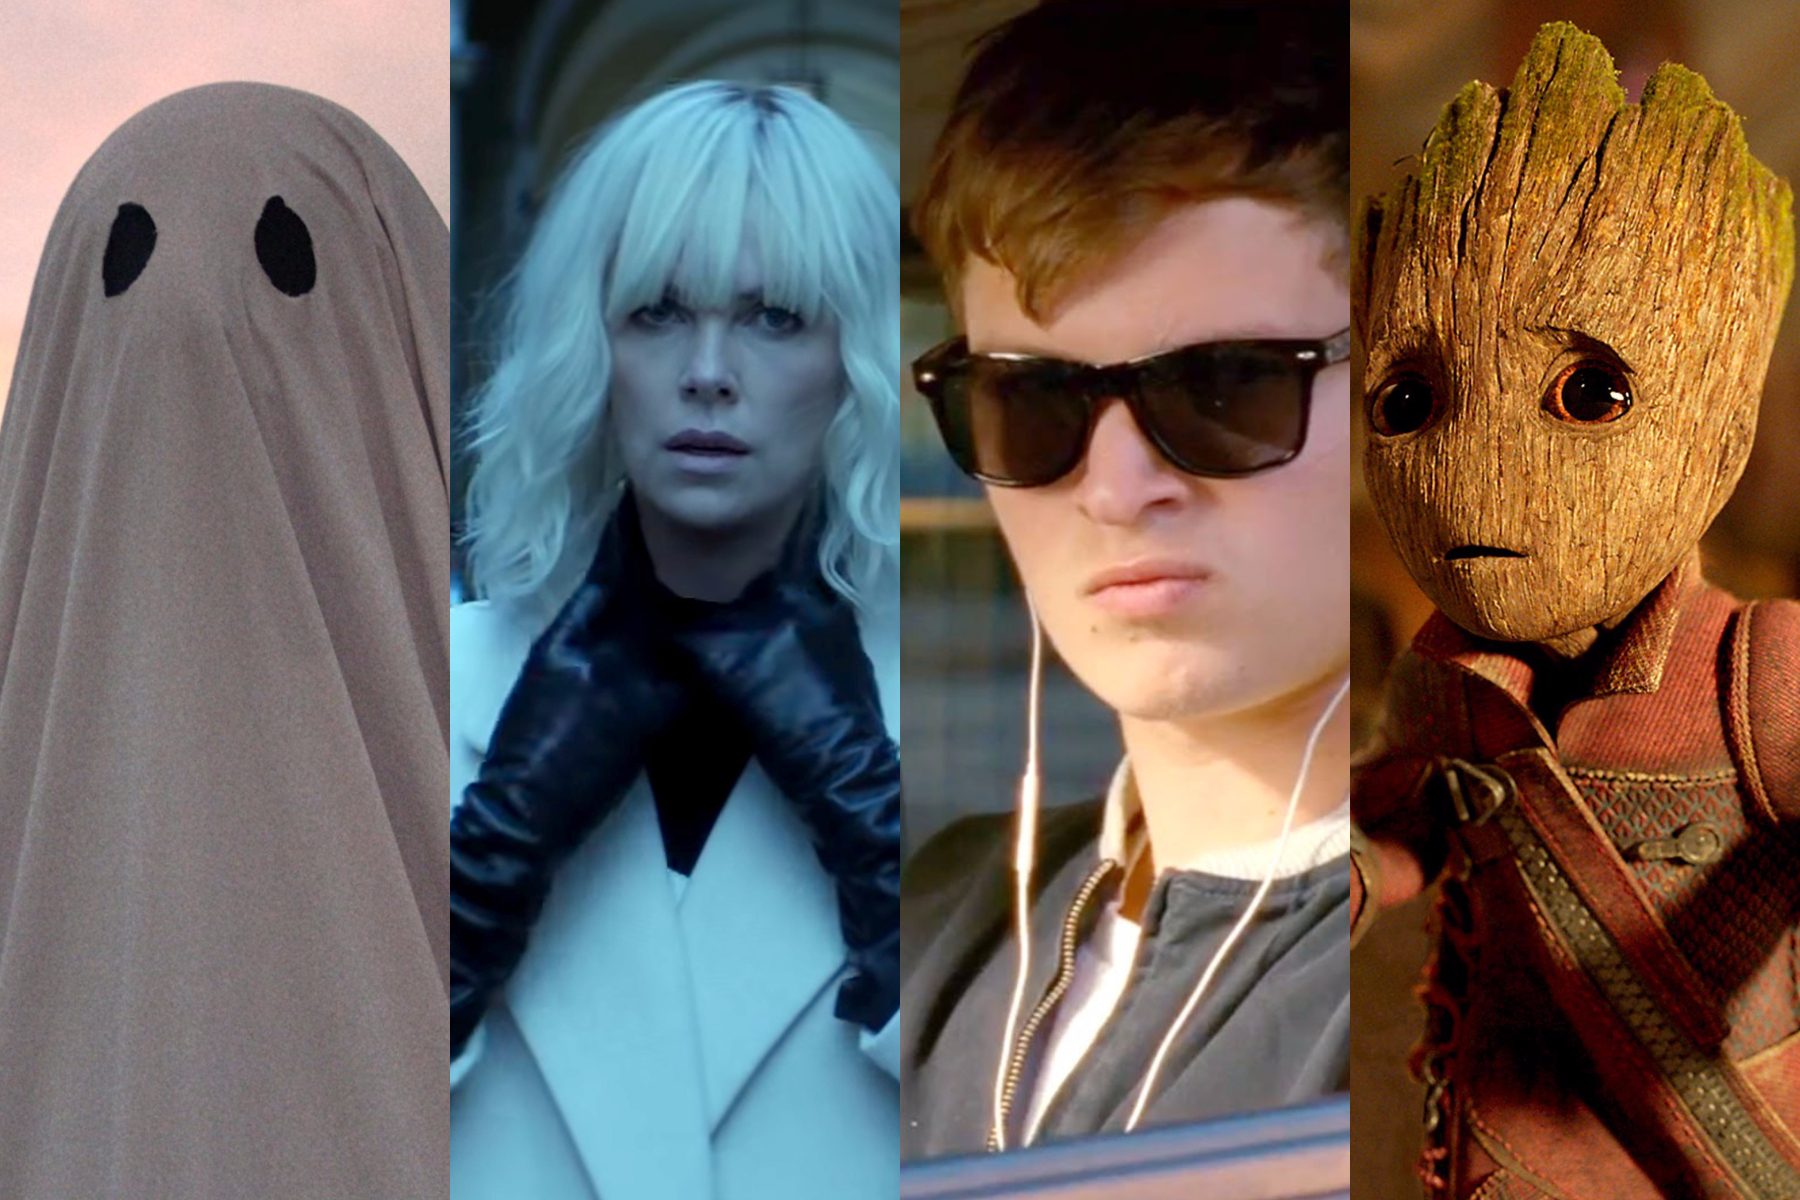 A Ghost Story, Atomic Blonde, Baby Driver, and Guardians of the Galaxy Vol. 2